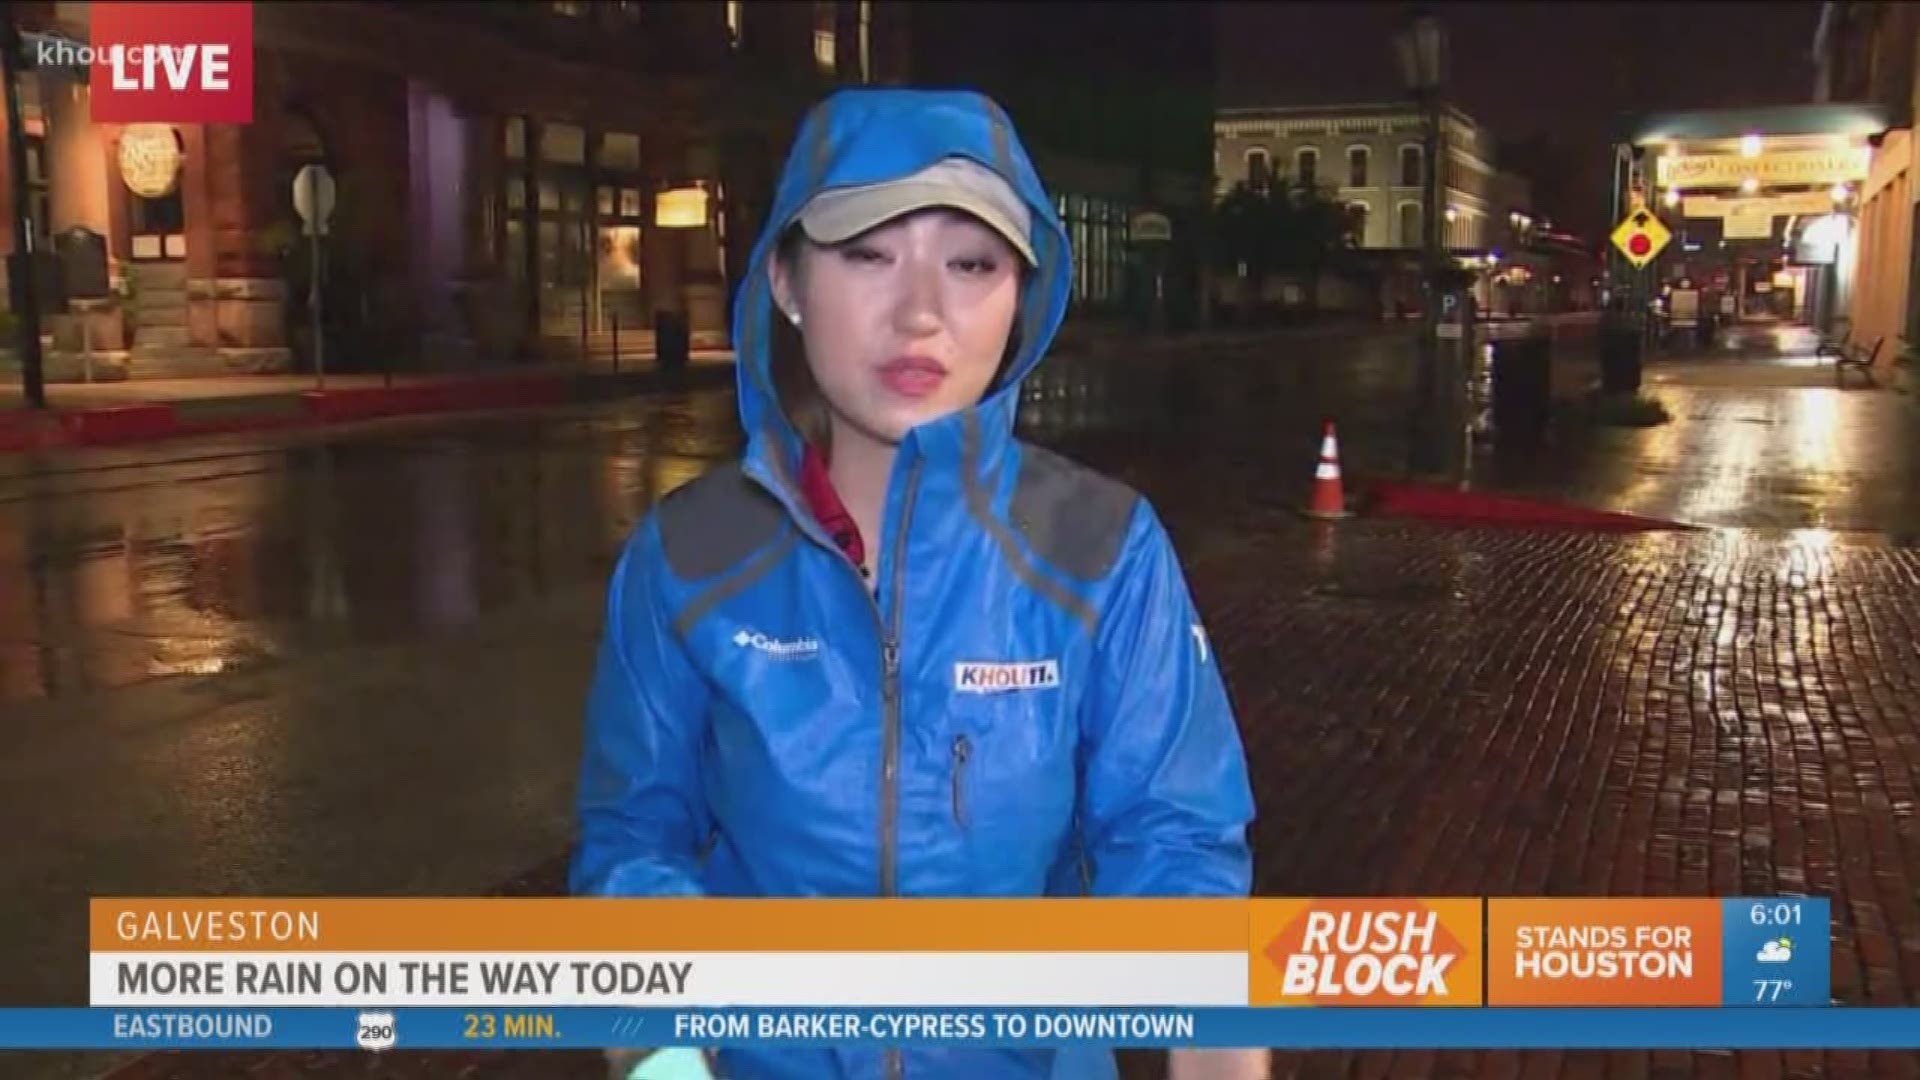 Top headlines at 6 a.m. include the latest on Tropical Storm Gordon, more rain in the forecast today and reaction to the new Nike Kaepernick ad. 